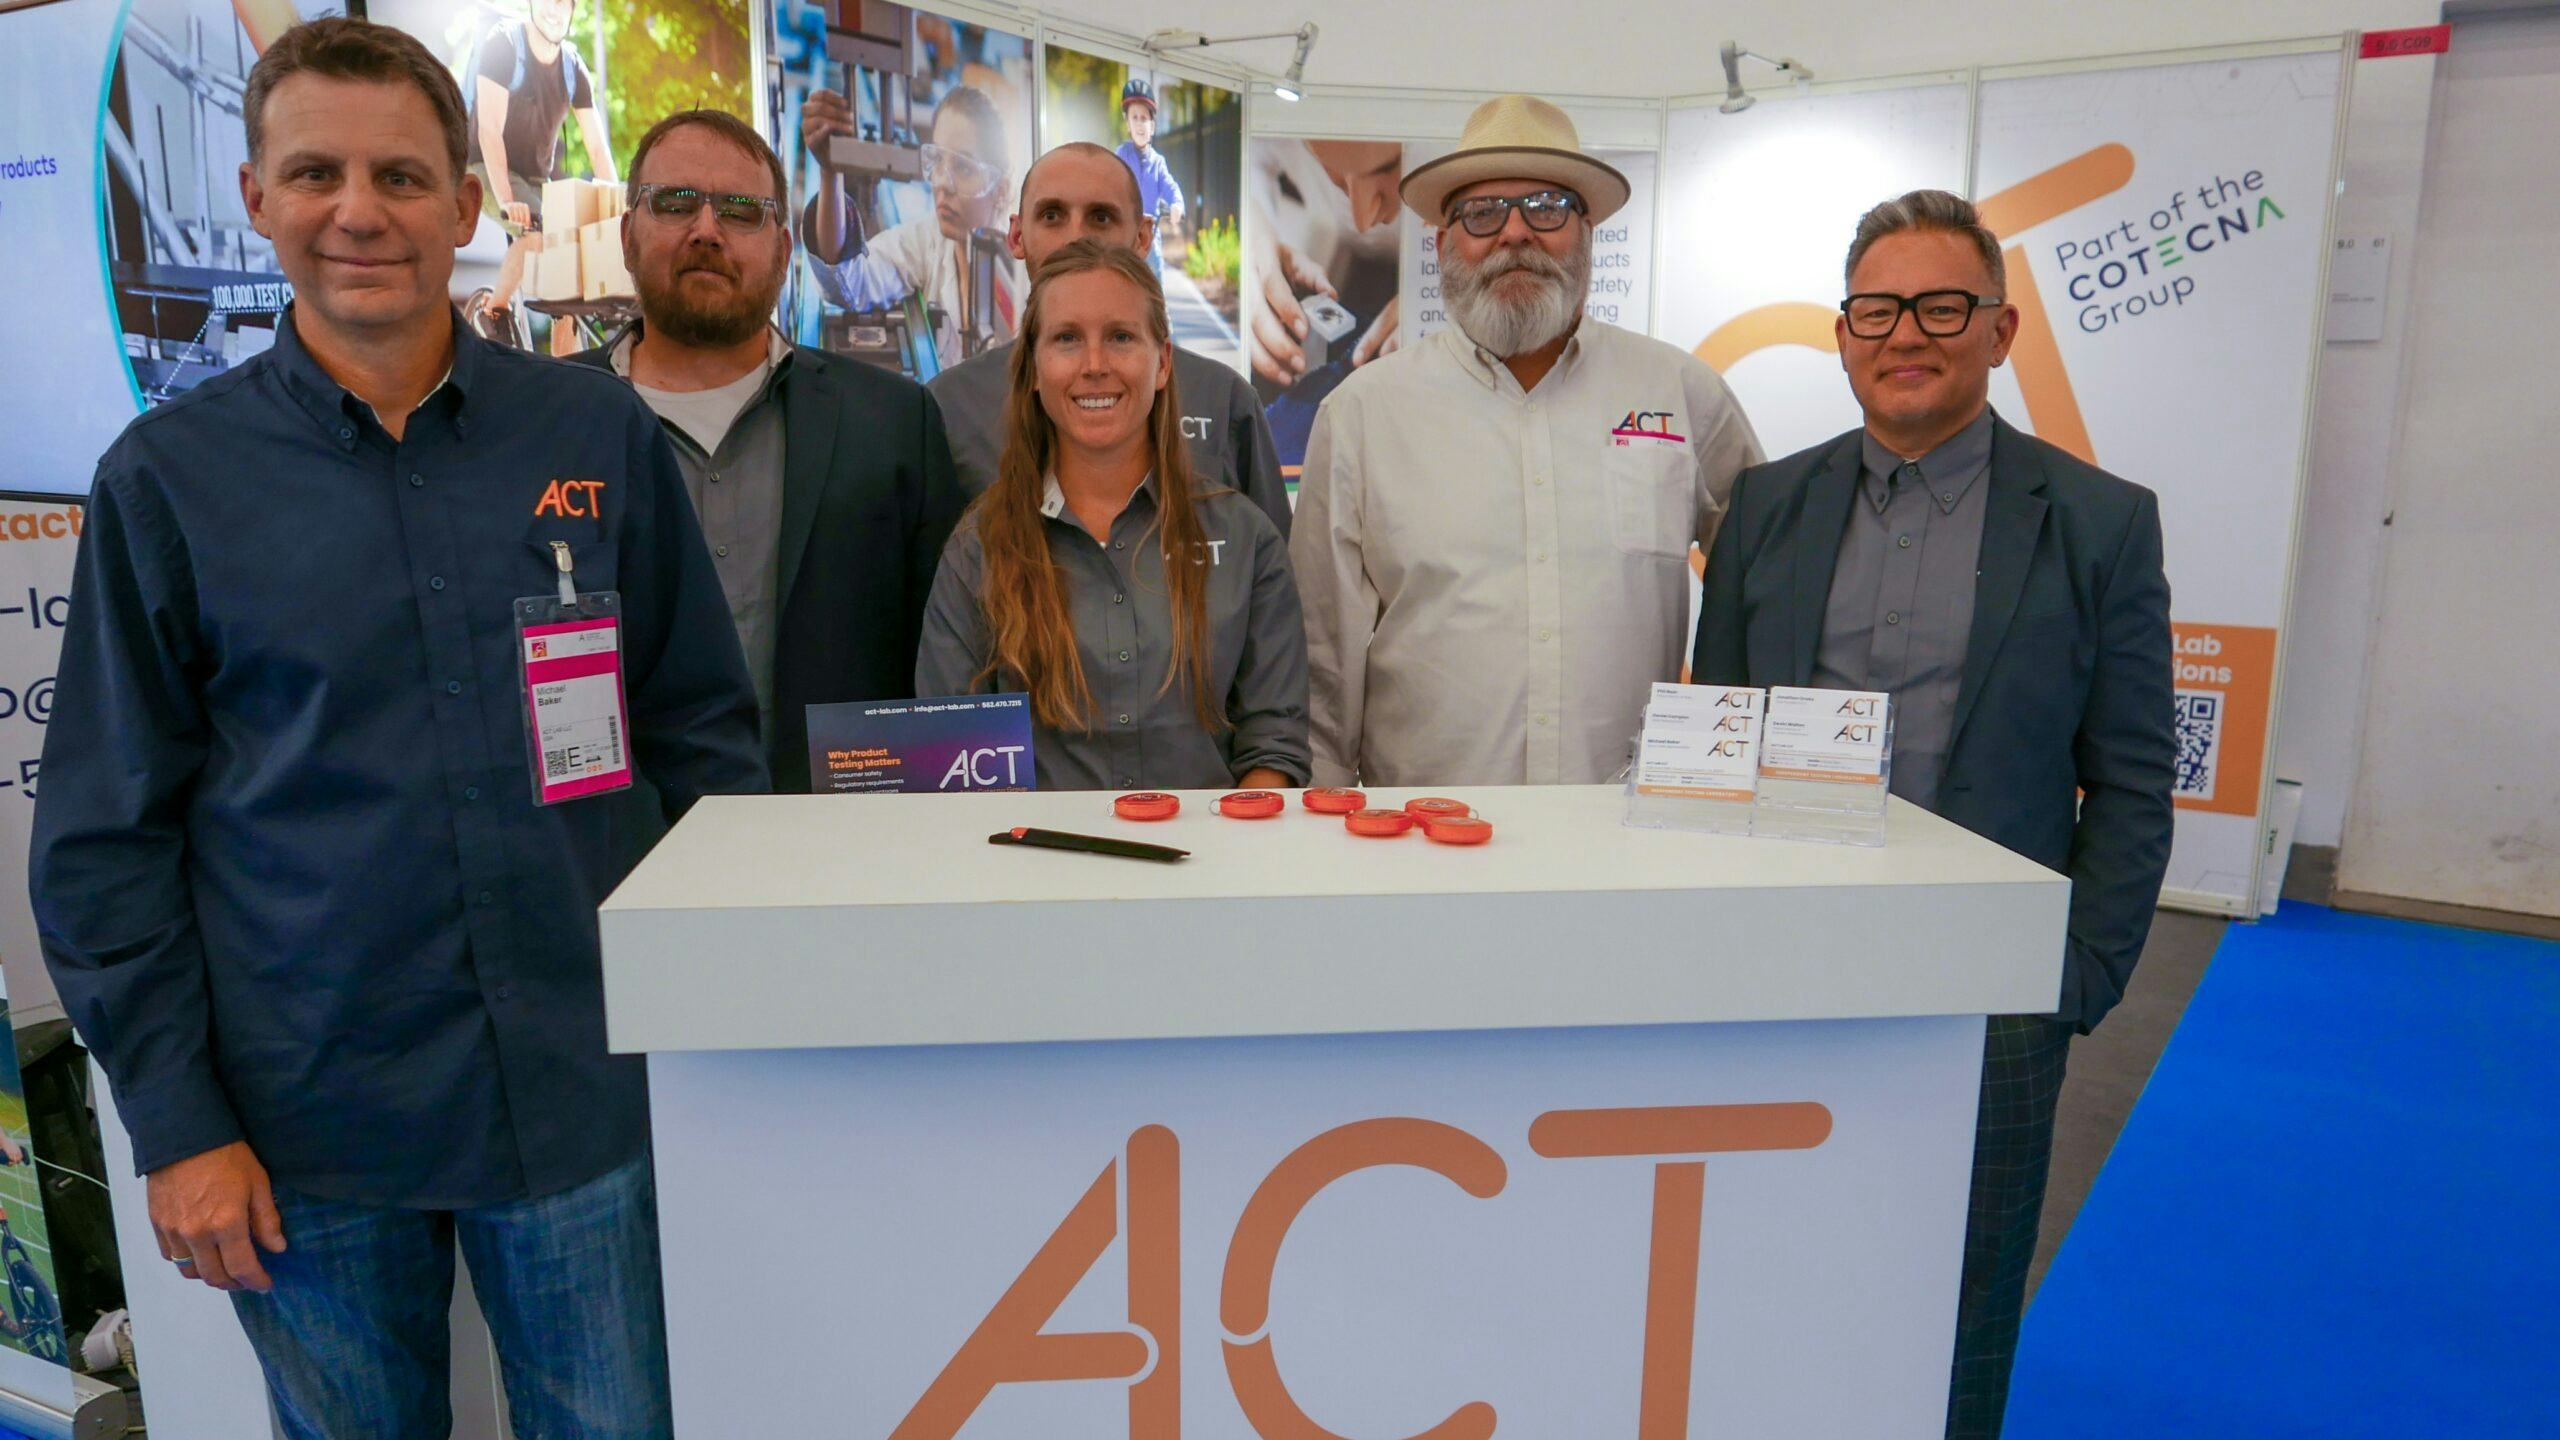 Part of the nine-person ACT Lab team present at Eurobike (left Michael Baker, Steve Boehmke with hat). - Photo Jo Beckendorff